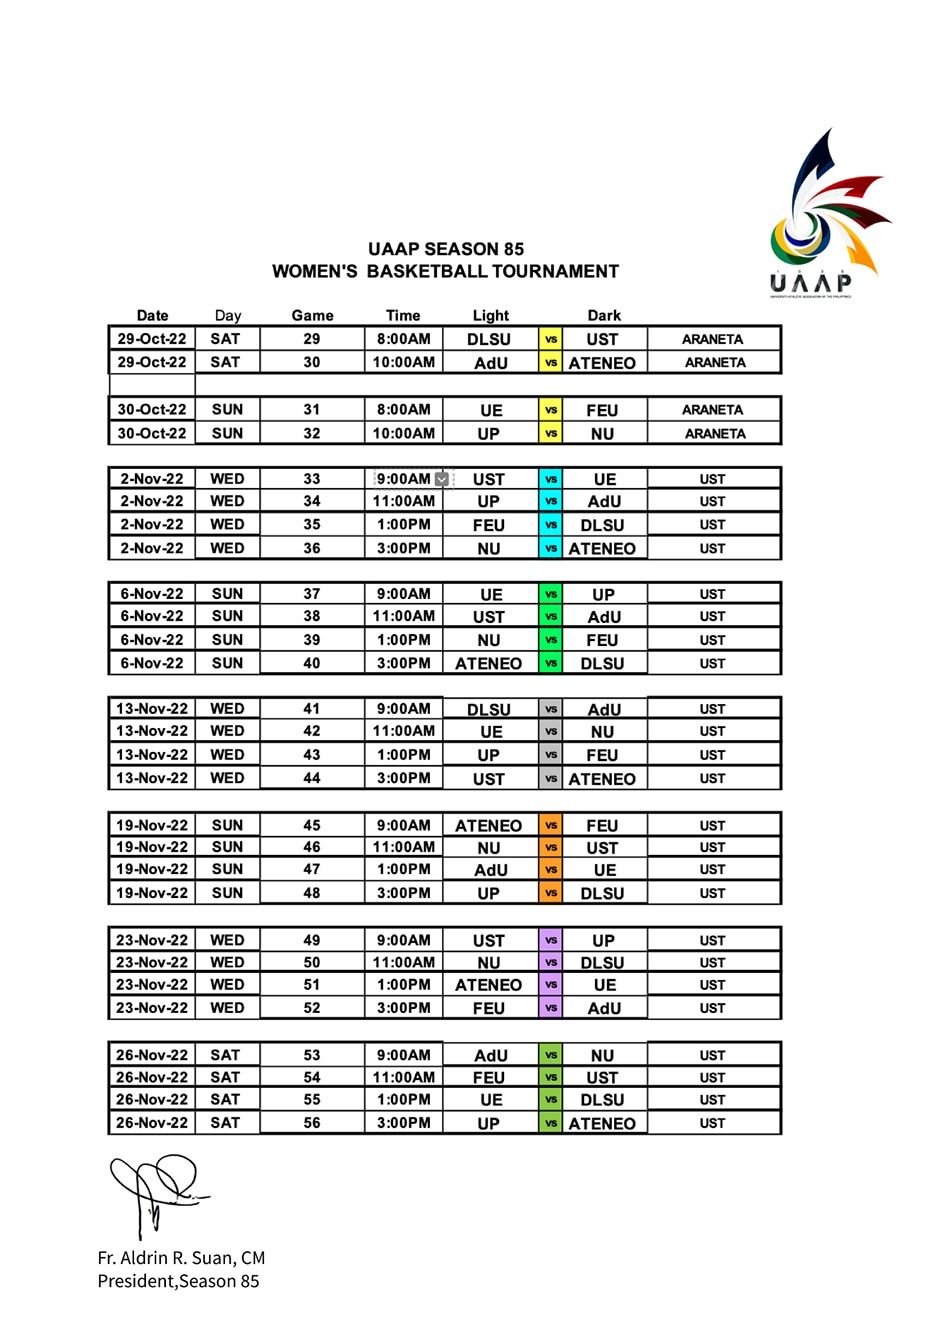 The schedule for the second phase of the women's season